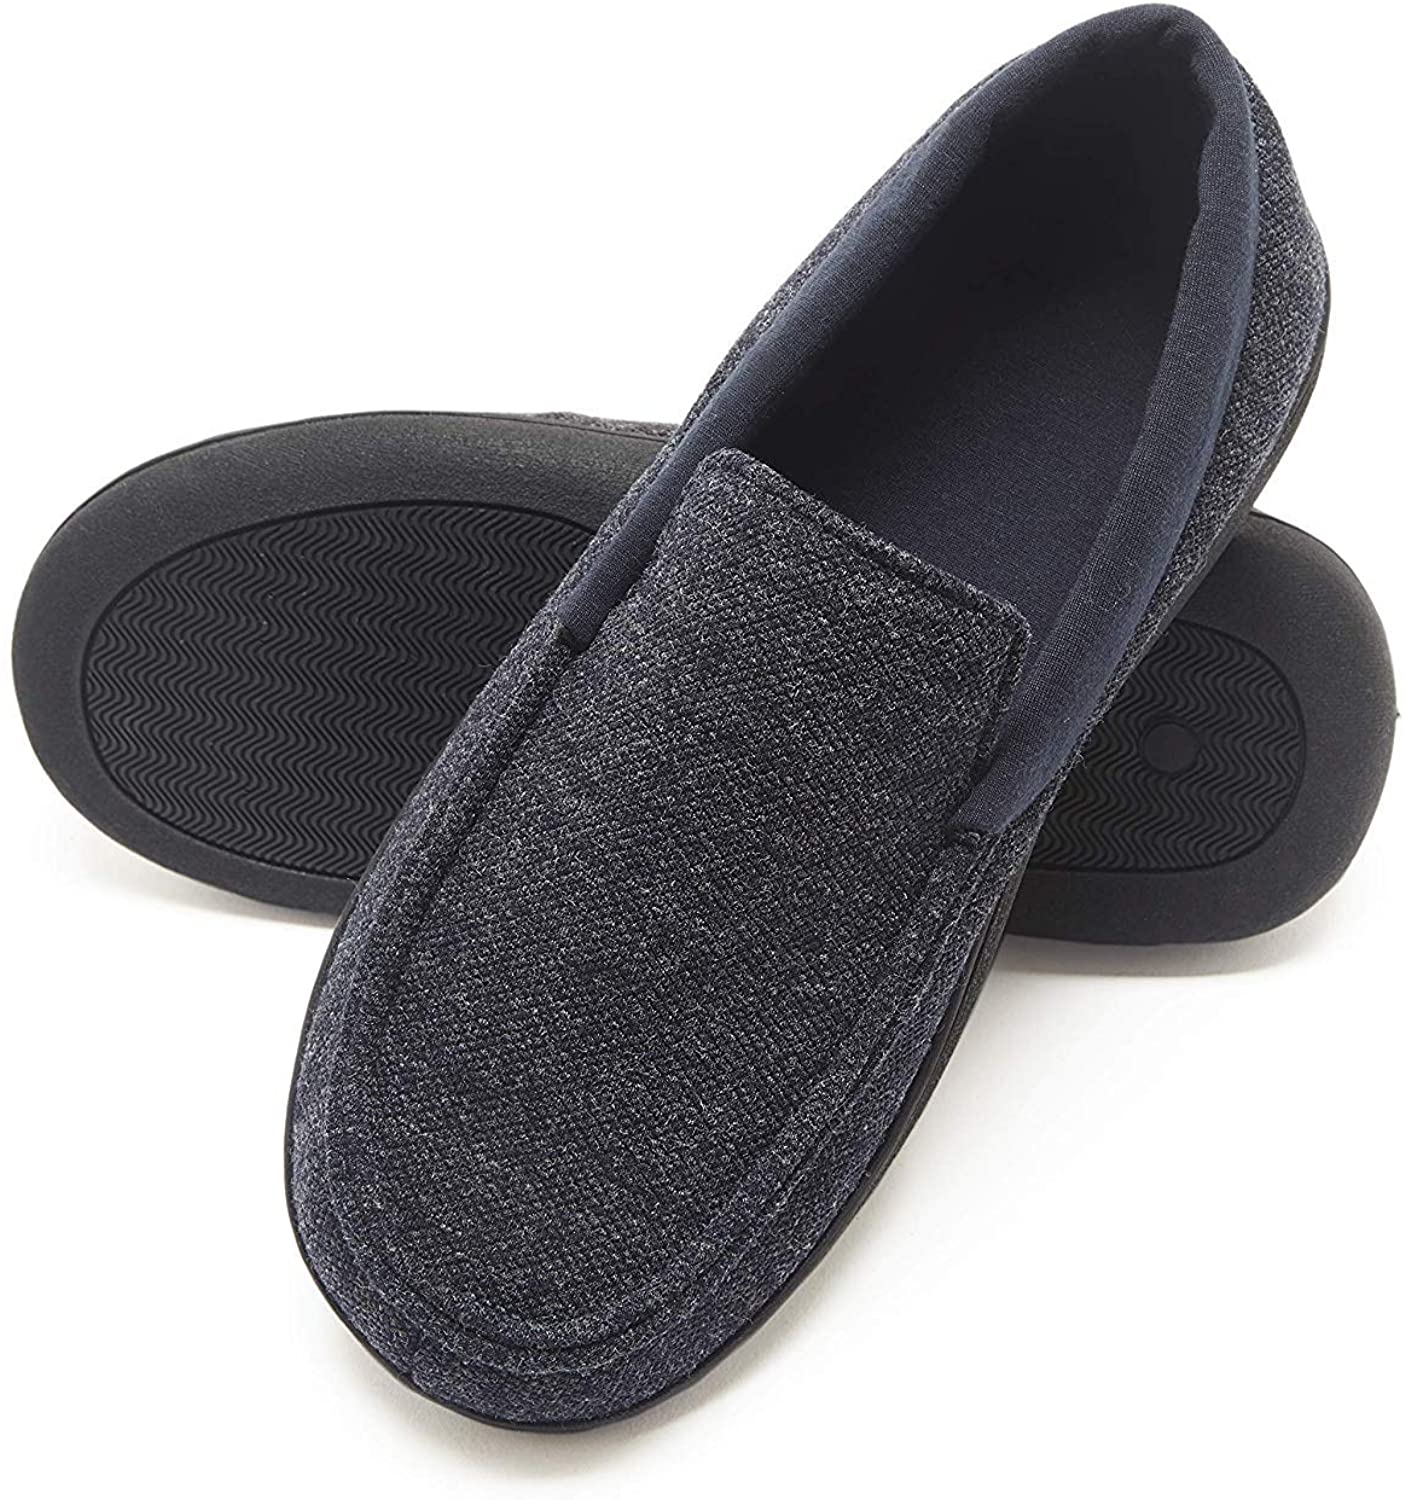 Hanes Men's Slippers House Shoes Moccasin Comfort Memory Foa